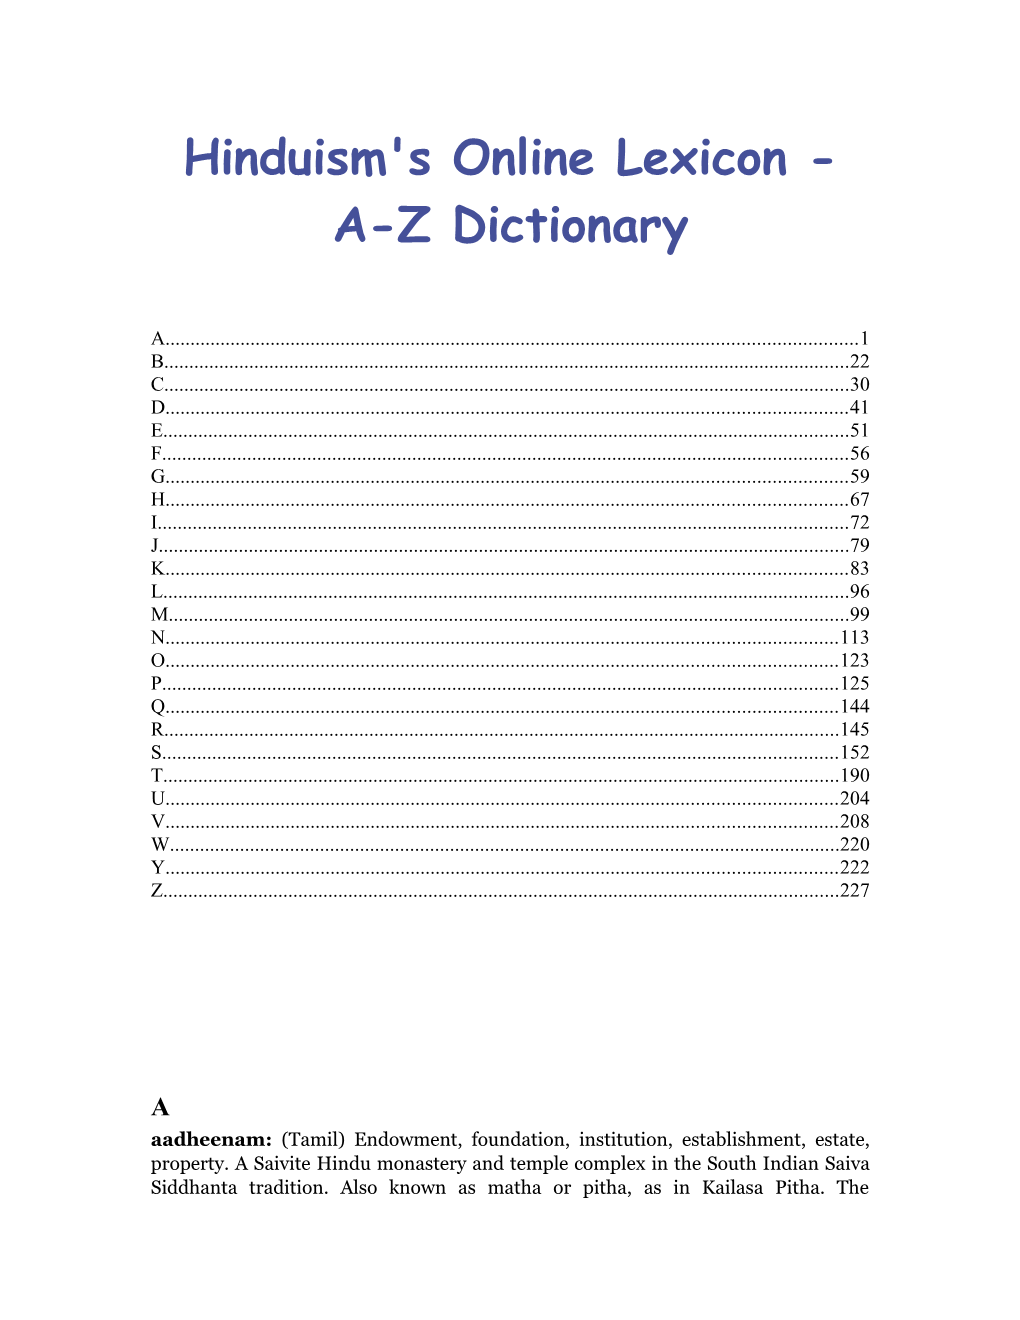 Hinduism's Online Lexicon - A-Z Dictionary